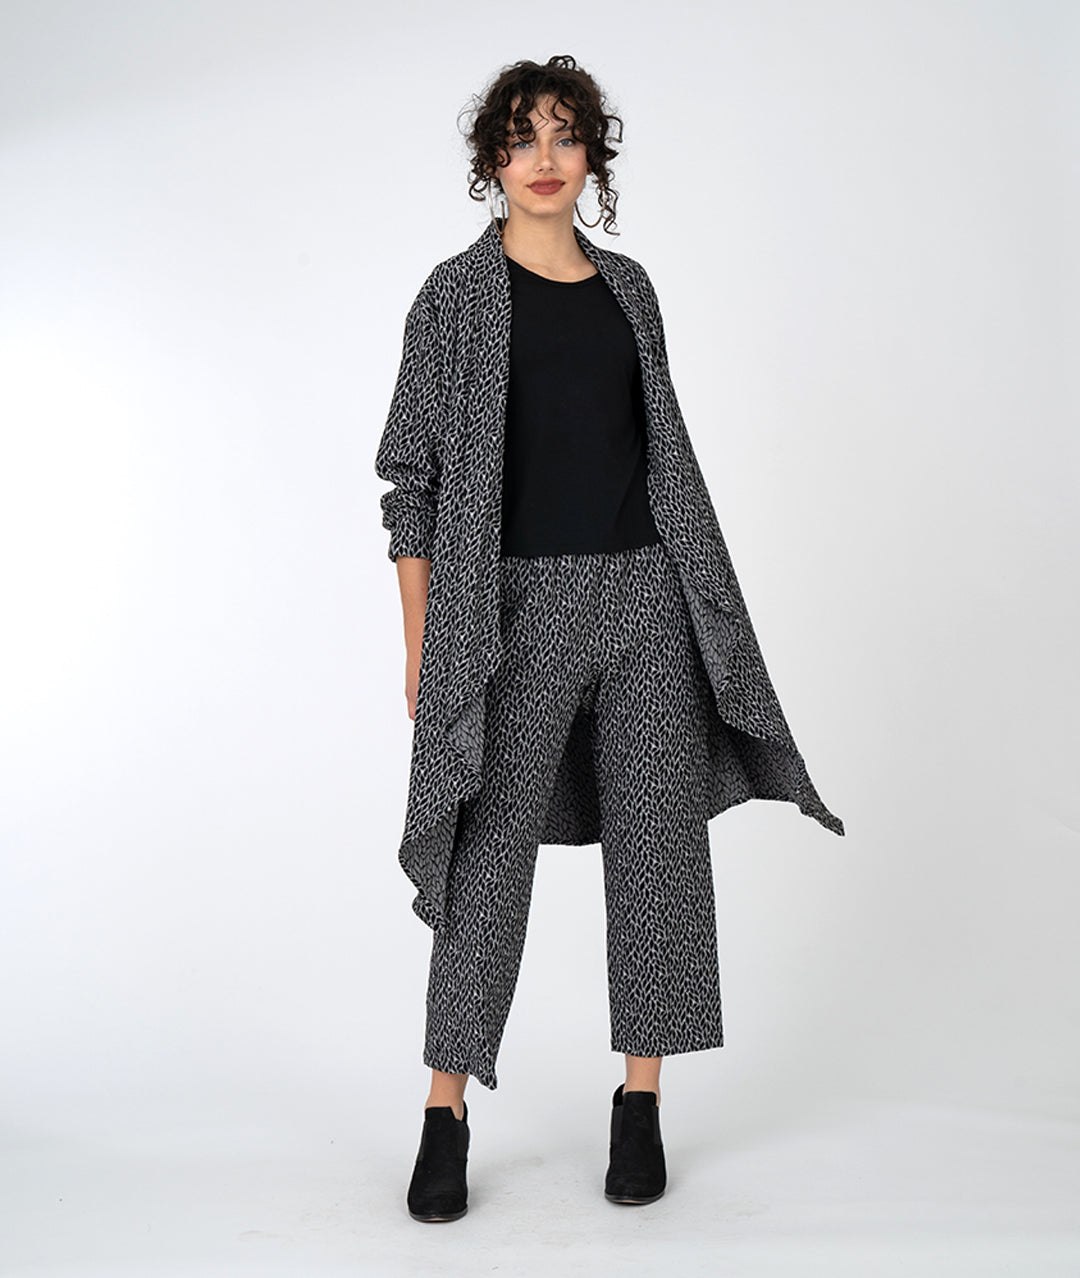 model in a black and grey leaf print straight leg pant, with a matching duster cardigan and a black tee